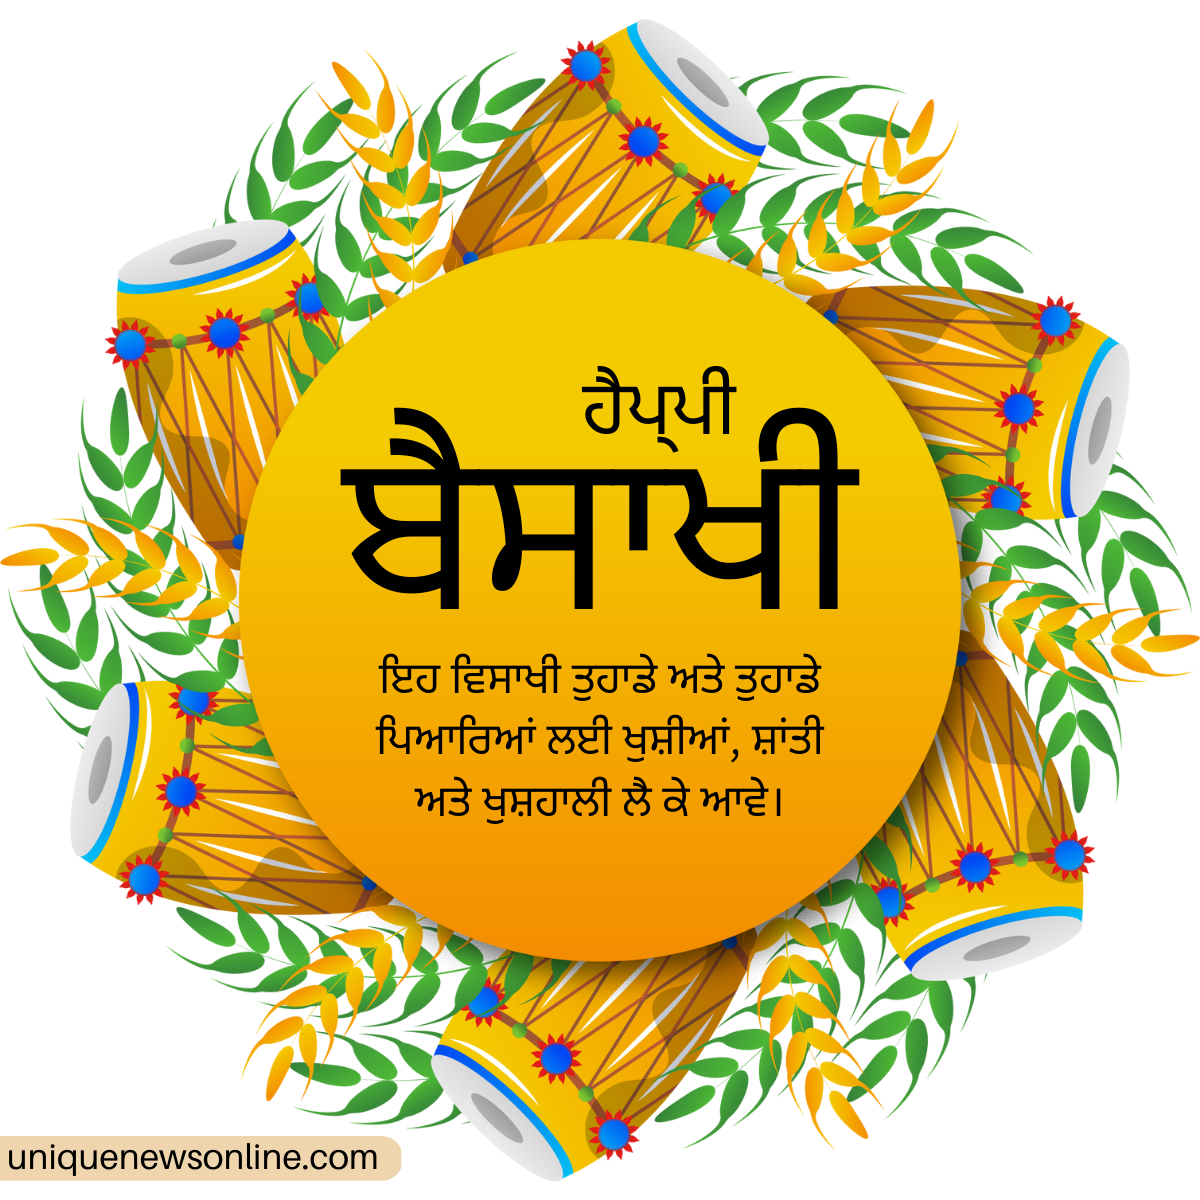 Happy Baisakhi 2023  Punjabi Wishes, Images, Messages, Greetings, Quotes, Sayings, Shayari, HD Wallpapers, WhatsApp DP, Posters and Banners to Share